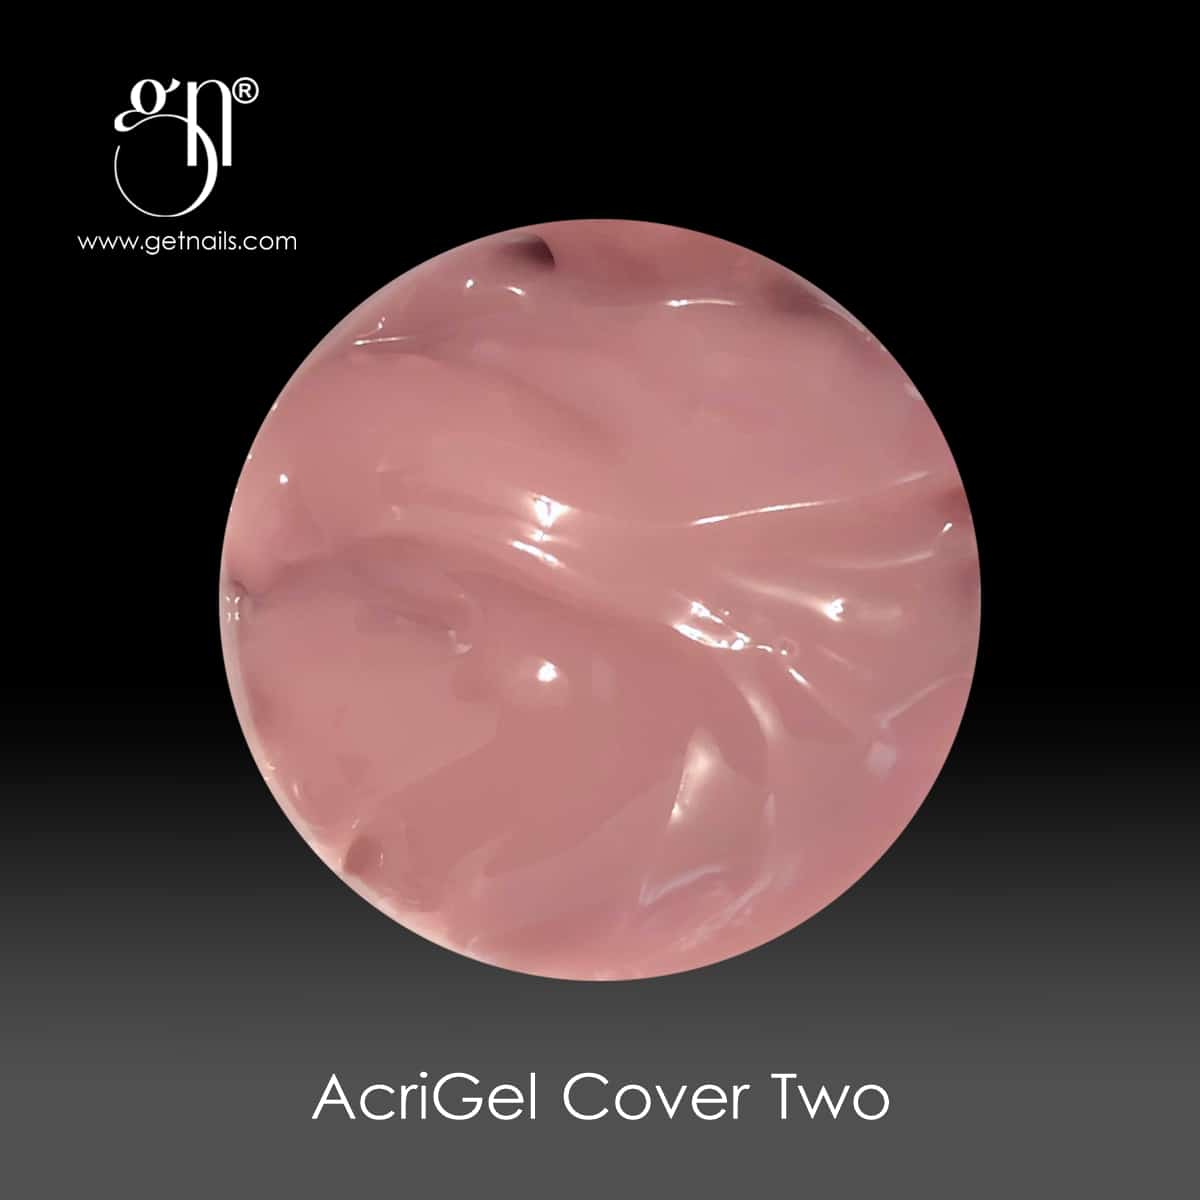 Get Nails Austria - AcriGel Cover Two 50г